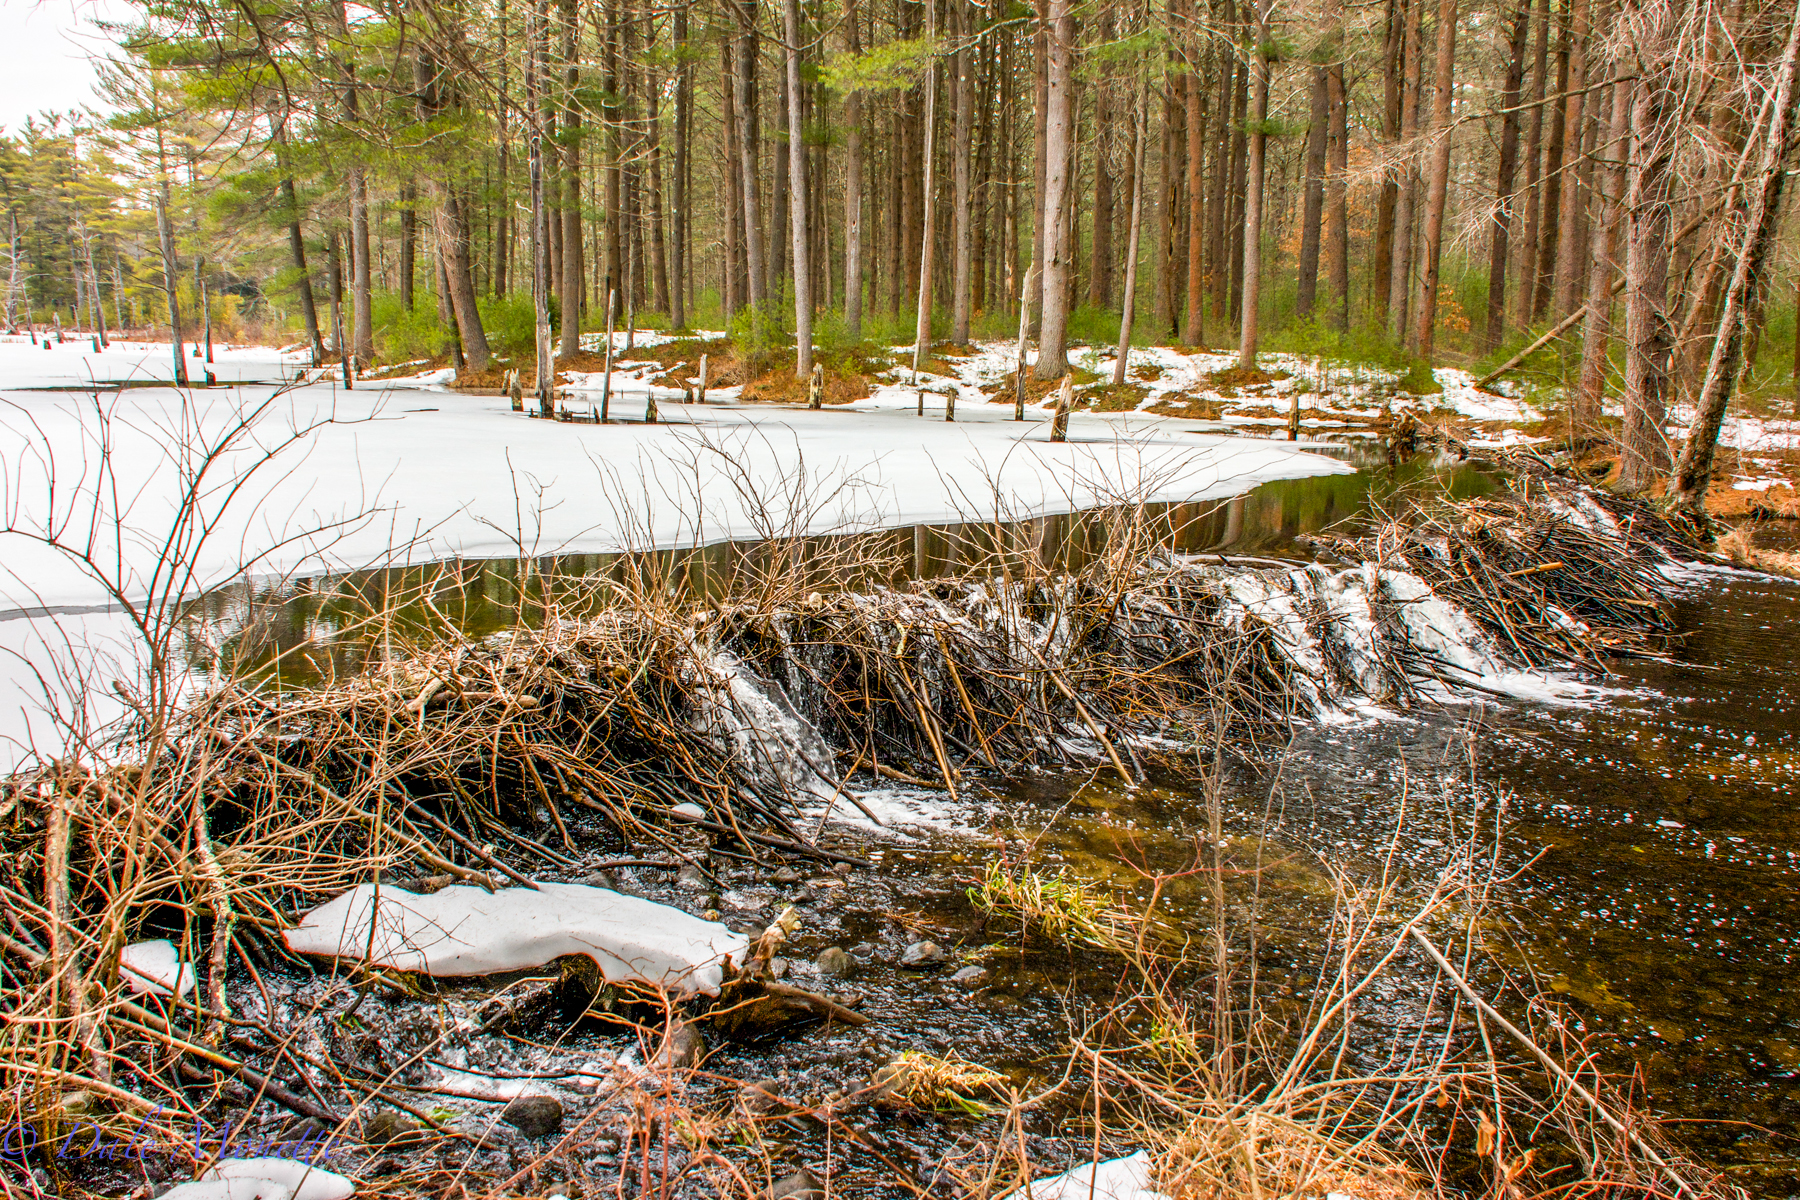   The west branch of Fever Brook dumps into the Quabbin from this beaver pond below Soapstone Mountain.&nbsp;  